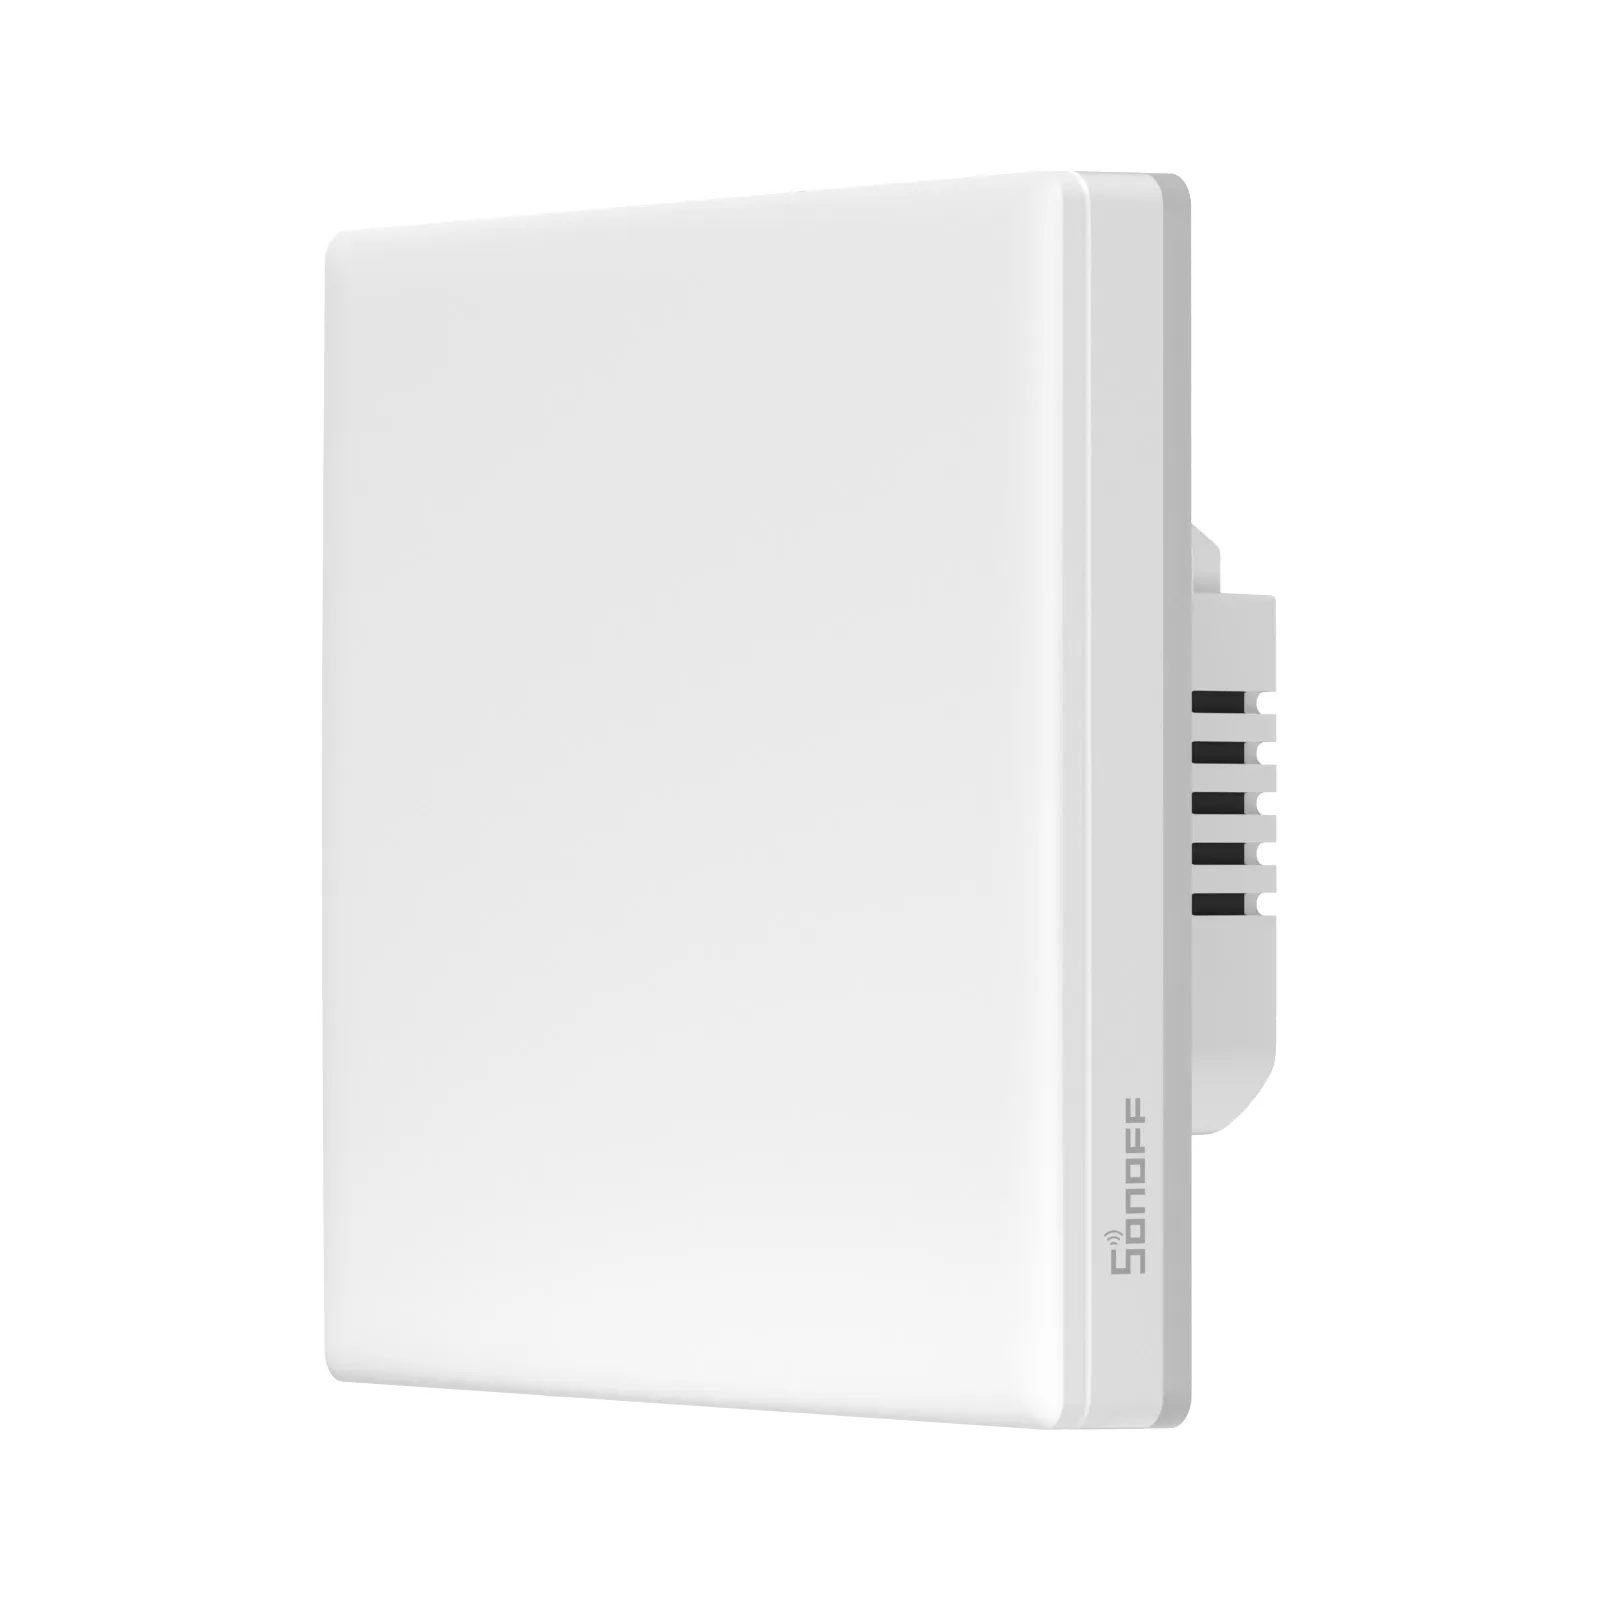 SONOFF TX Ultimate Smart Touch Wall Switch 1